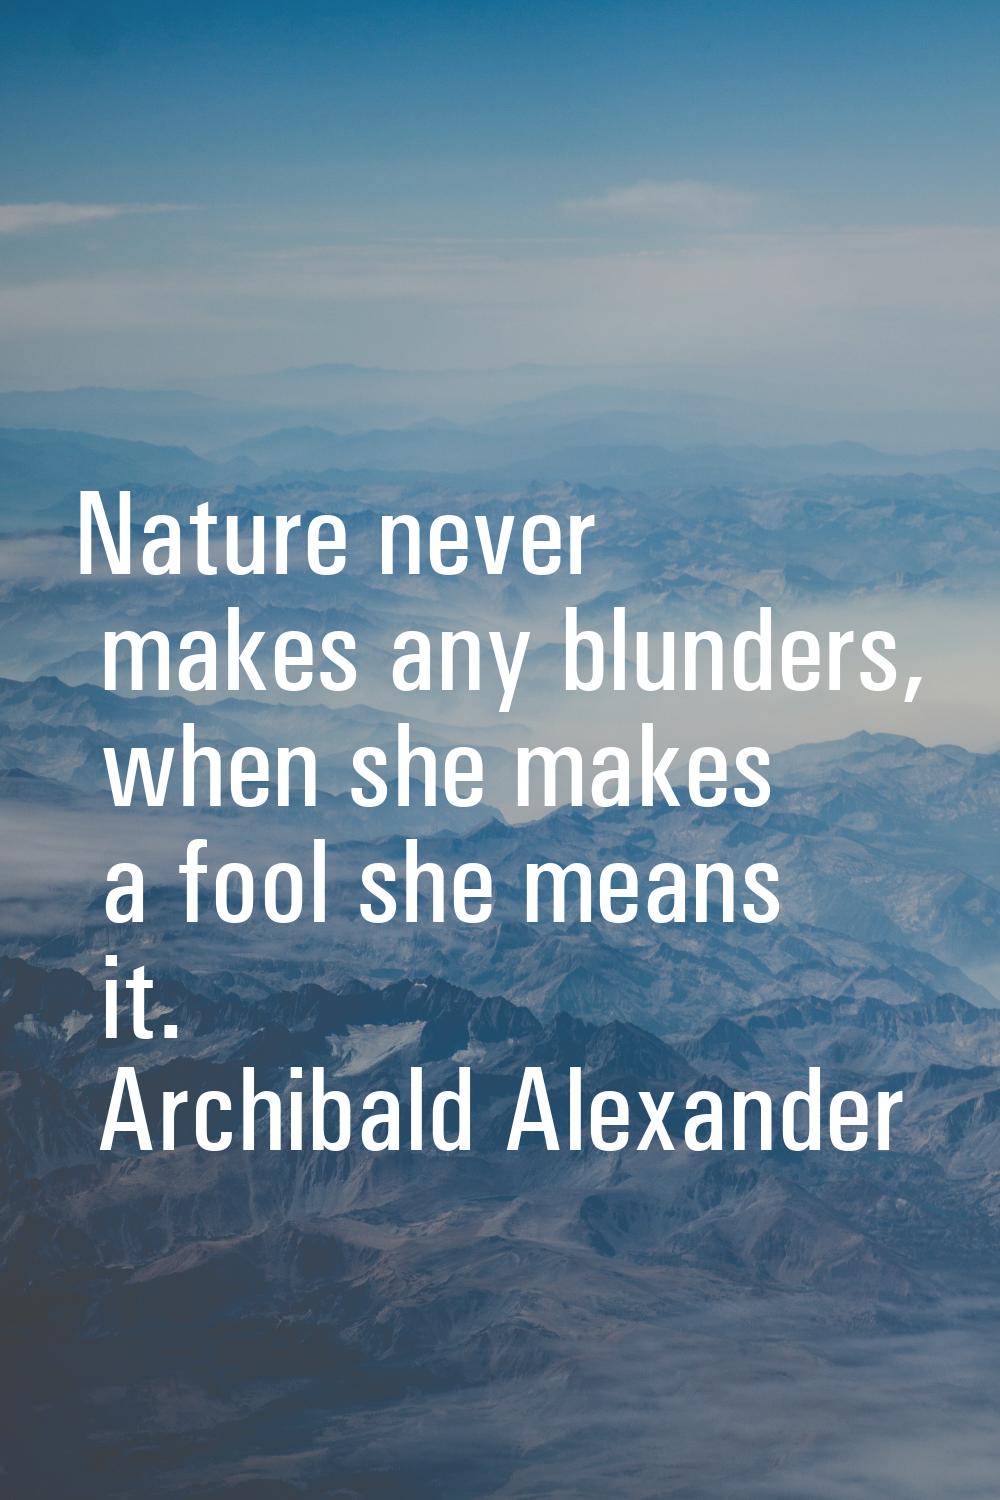 Nature never makes any blunders, when she makes a fool she means it.